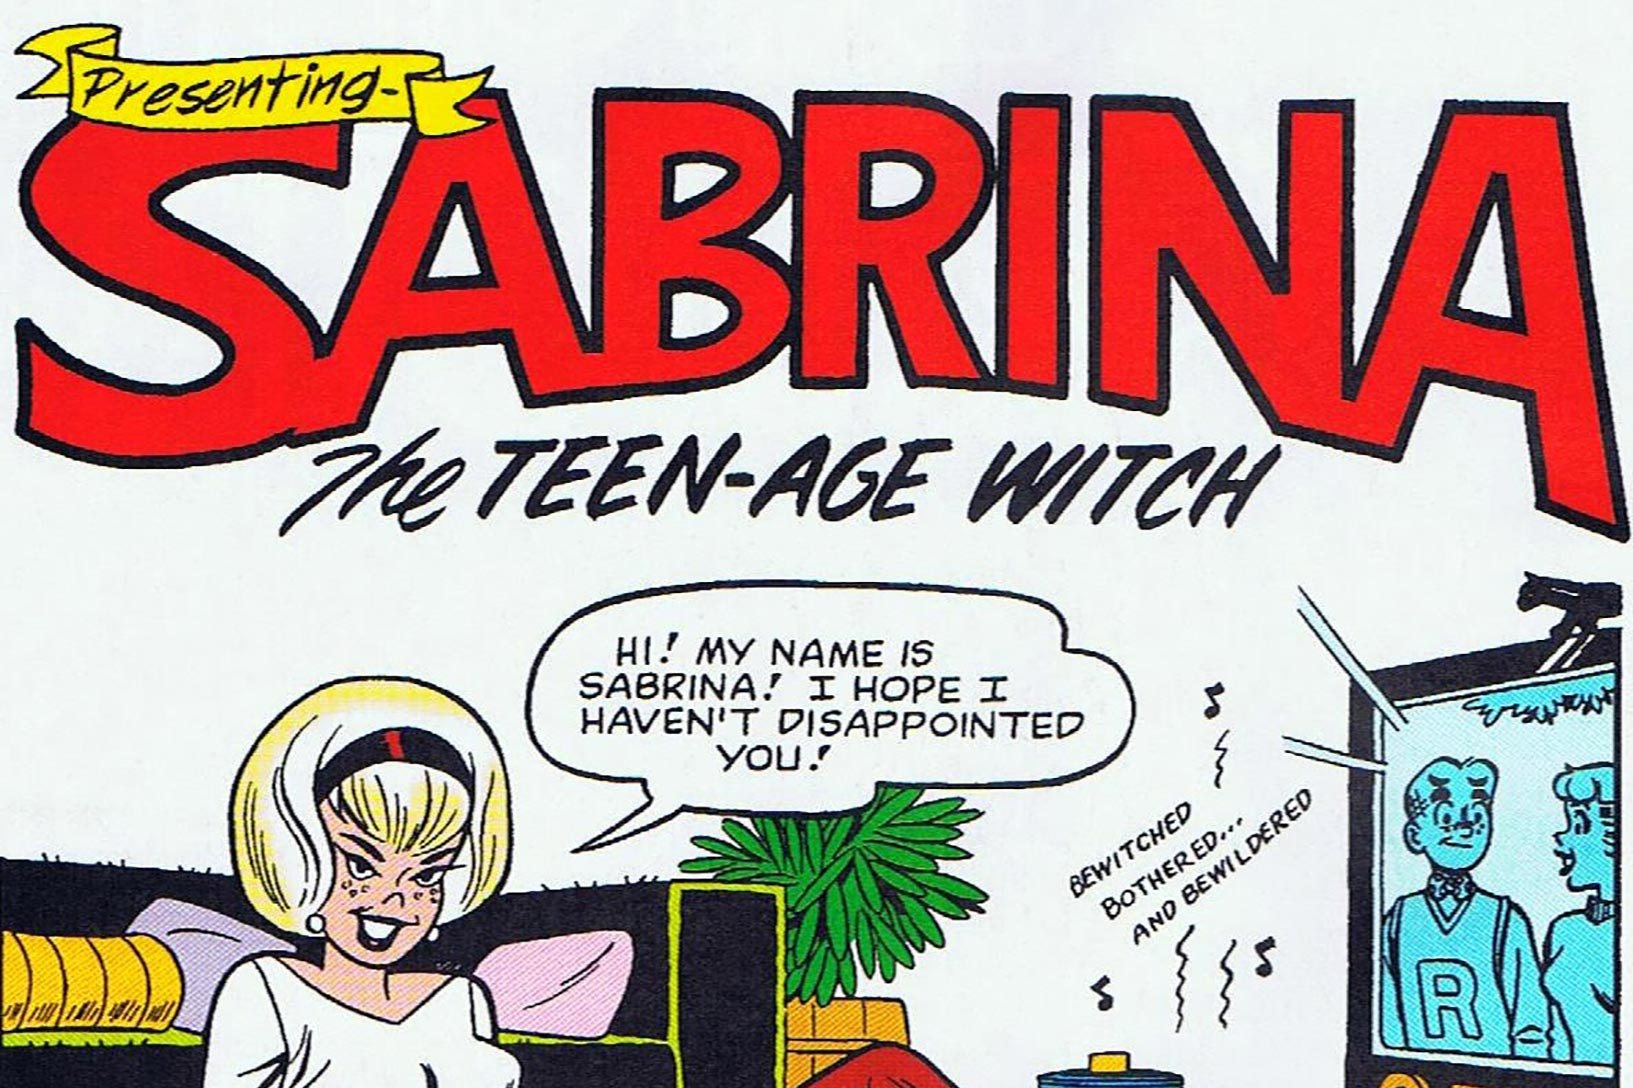 Sabrina the Teenage Witch is Next Archie Comics Character on TV